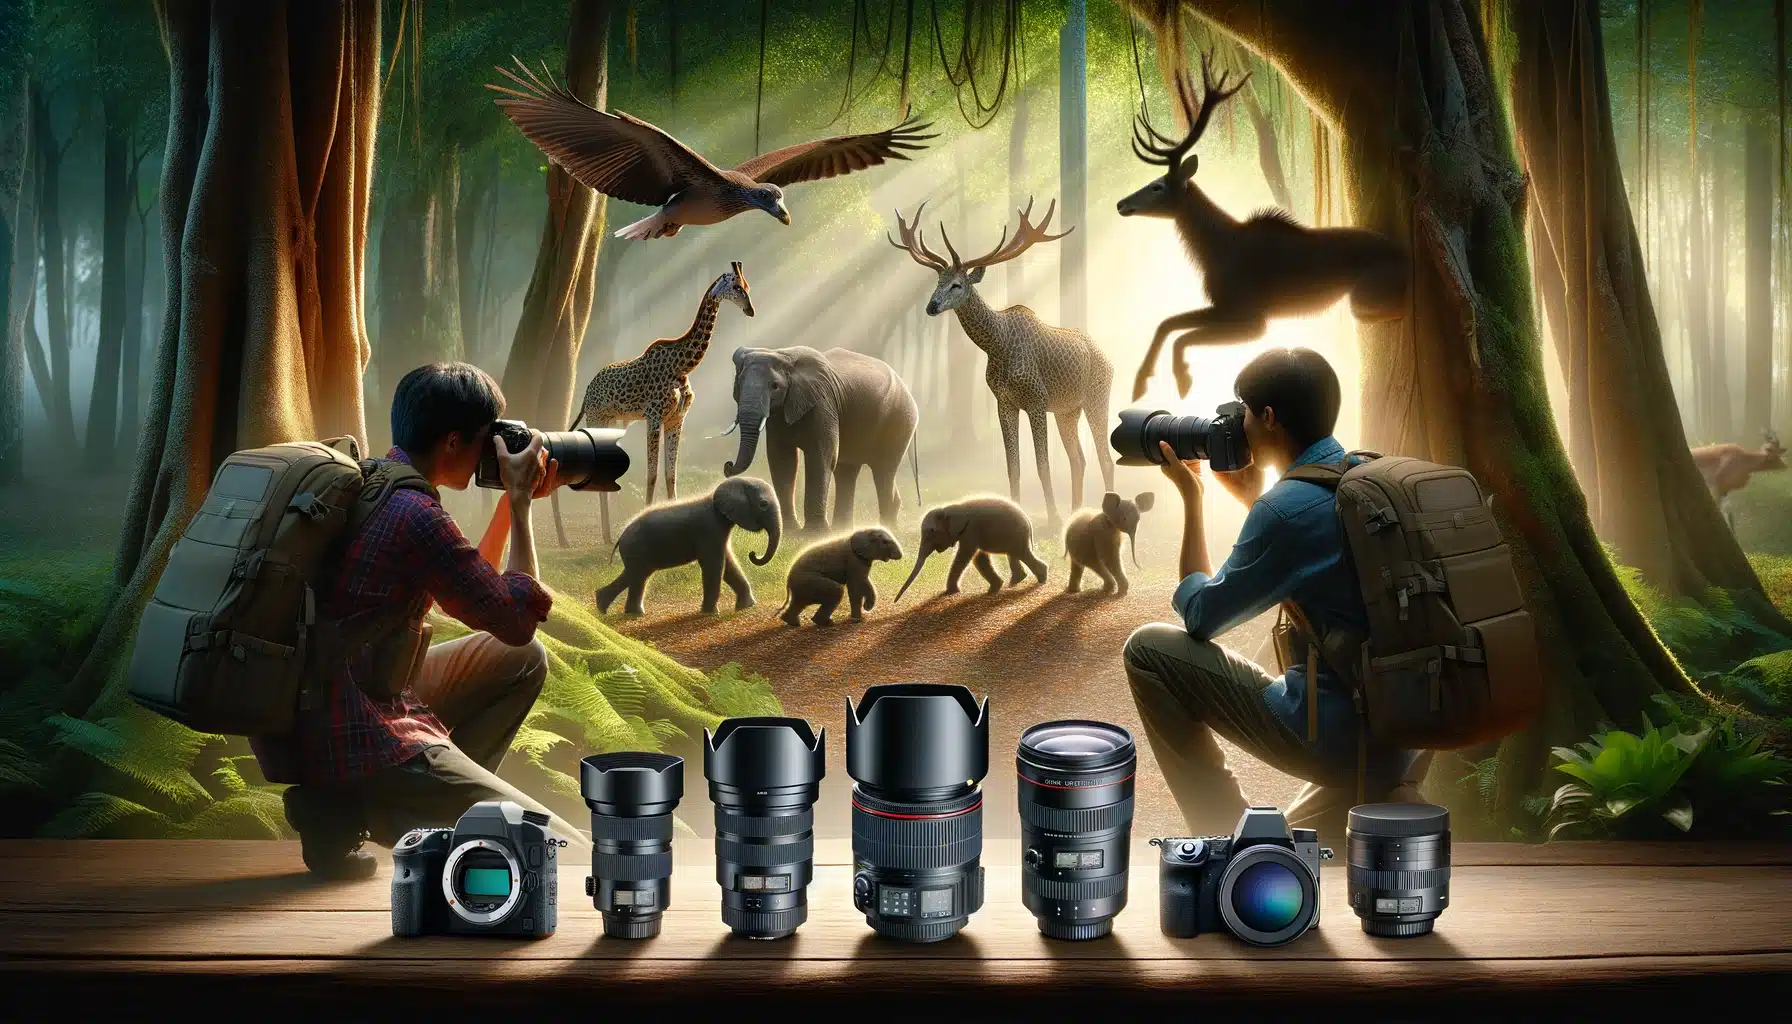 Two photographers in a forest capturing wildlife, with various professional Camcorders and lenses arrayed nearby for comparison.